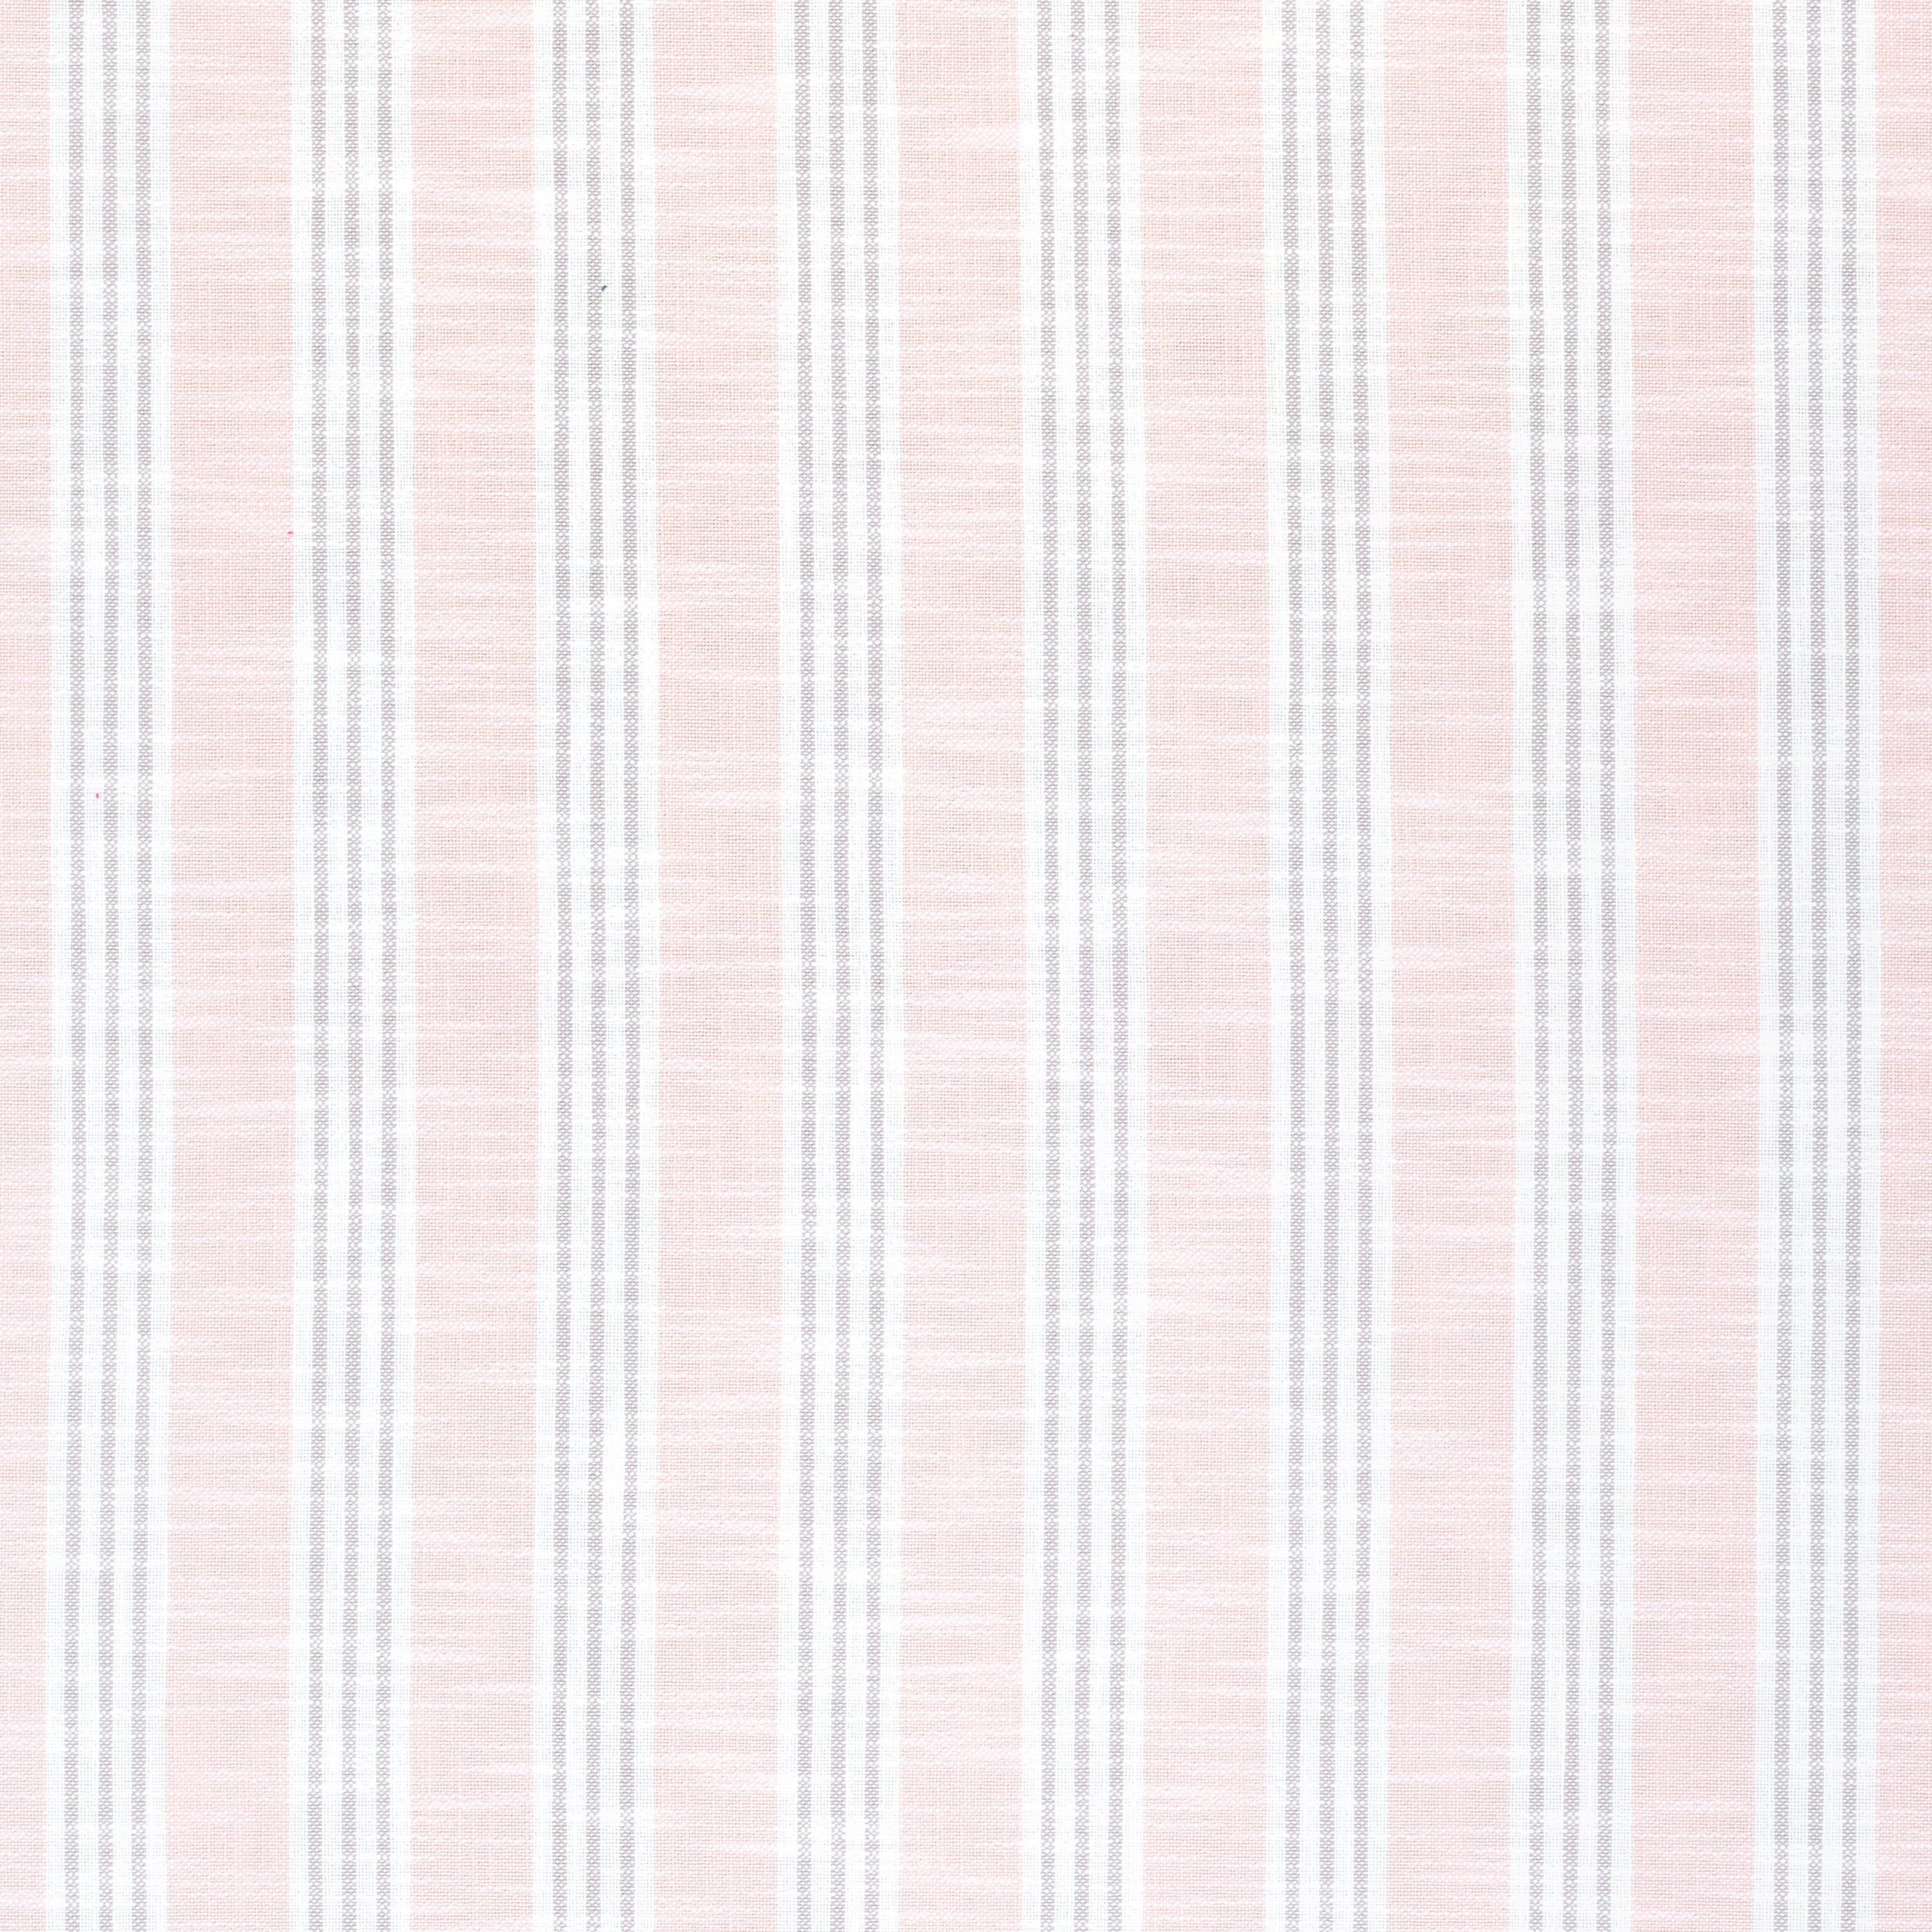 Southport Stripe fabric in blush and mushroom color - pattern number W73482 - by Thibaut in the Landmark collection